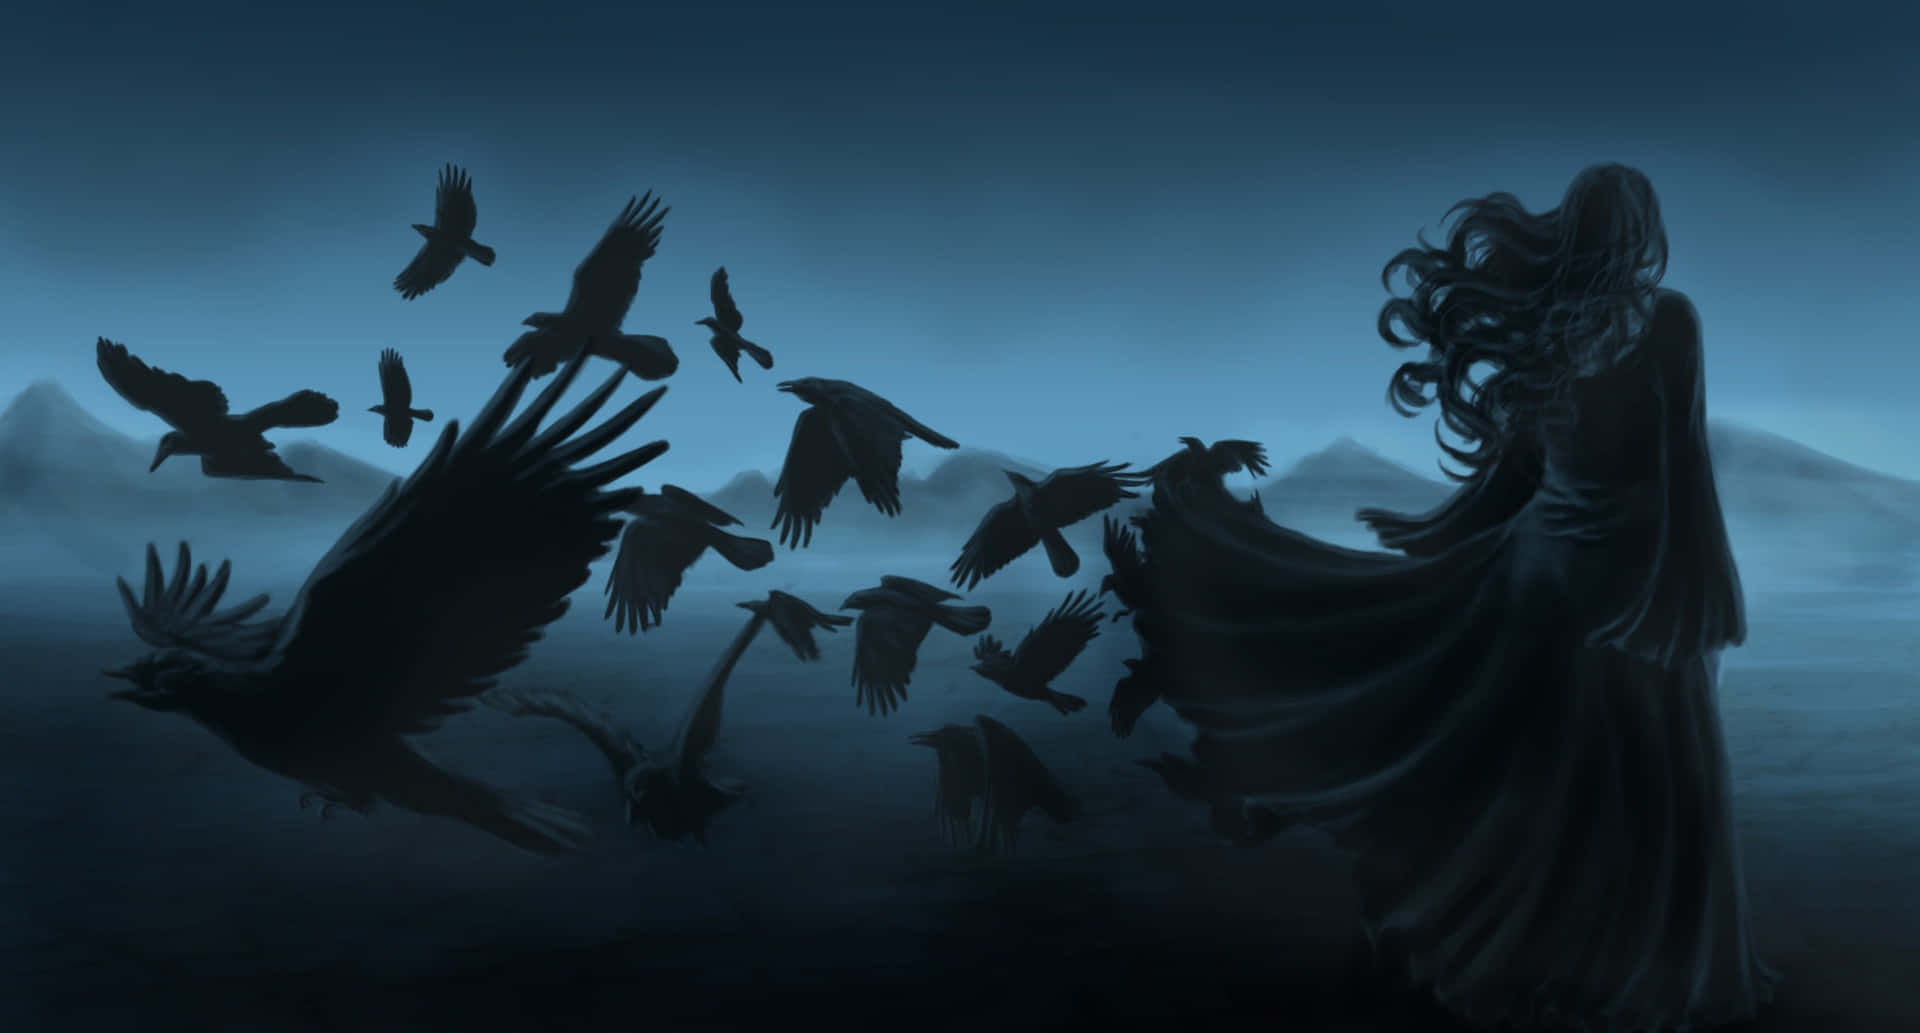 Gothic Computer Goth Girl With Crows Wallpaper